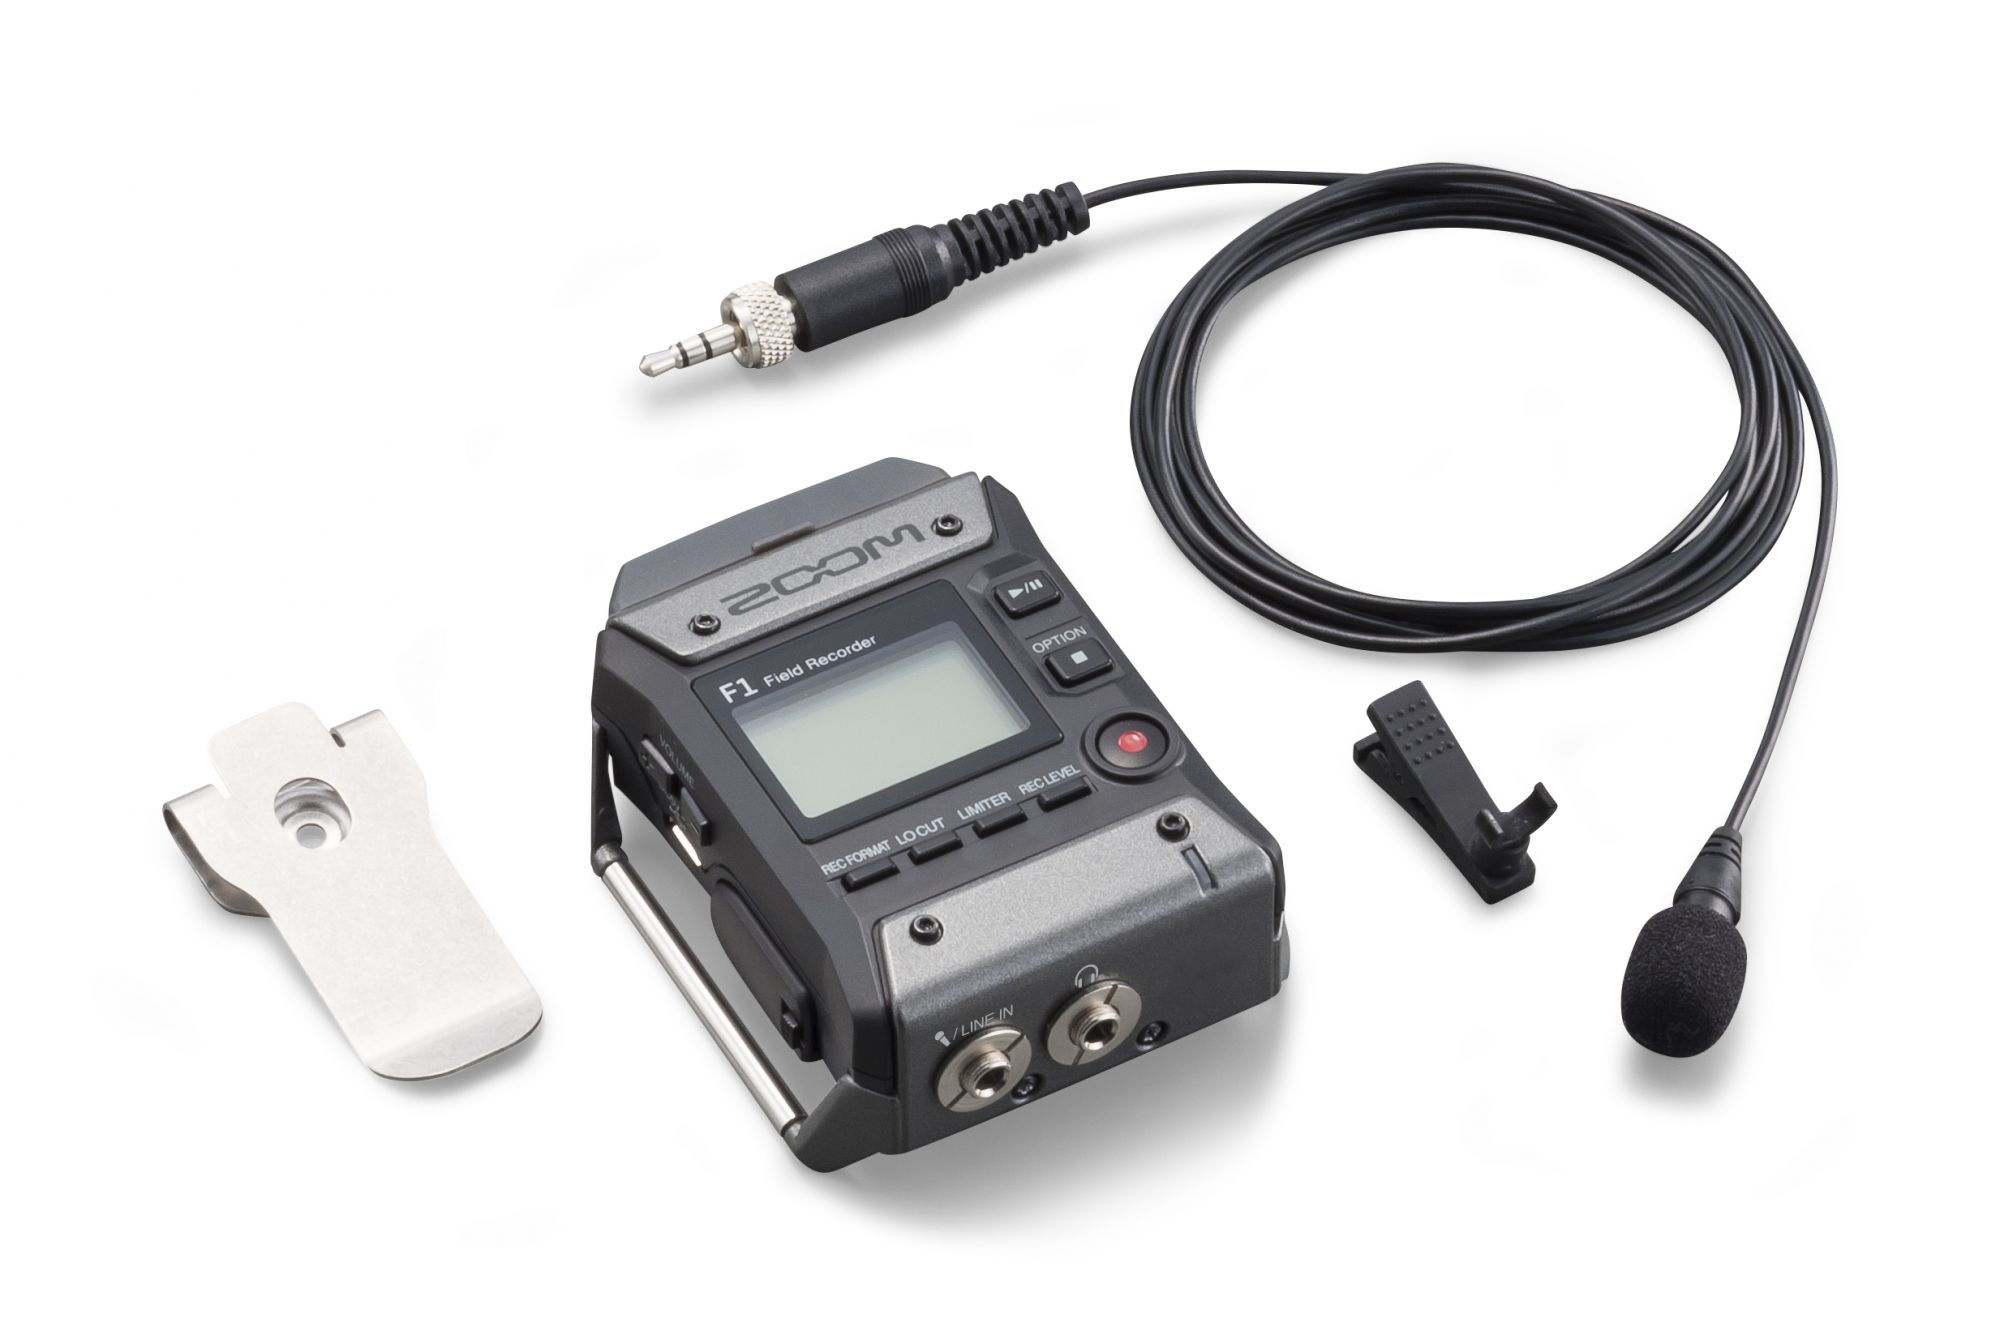 Zoom F1-LP Field Recorder and Lavalier Microphone